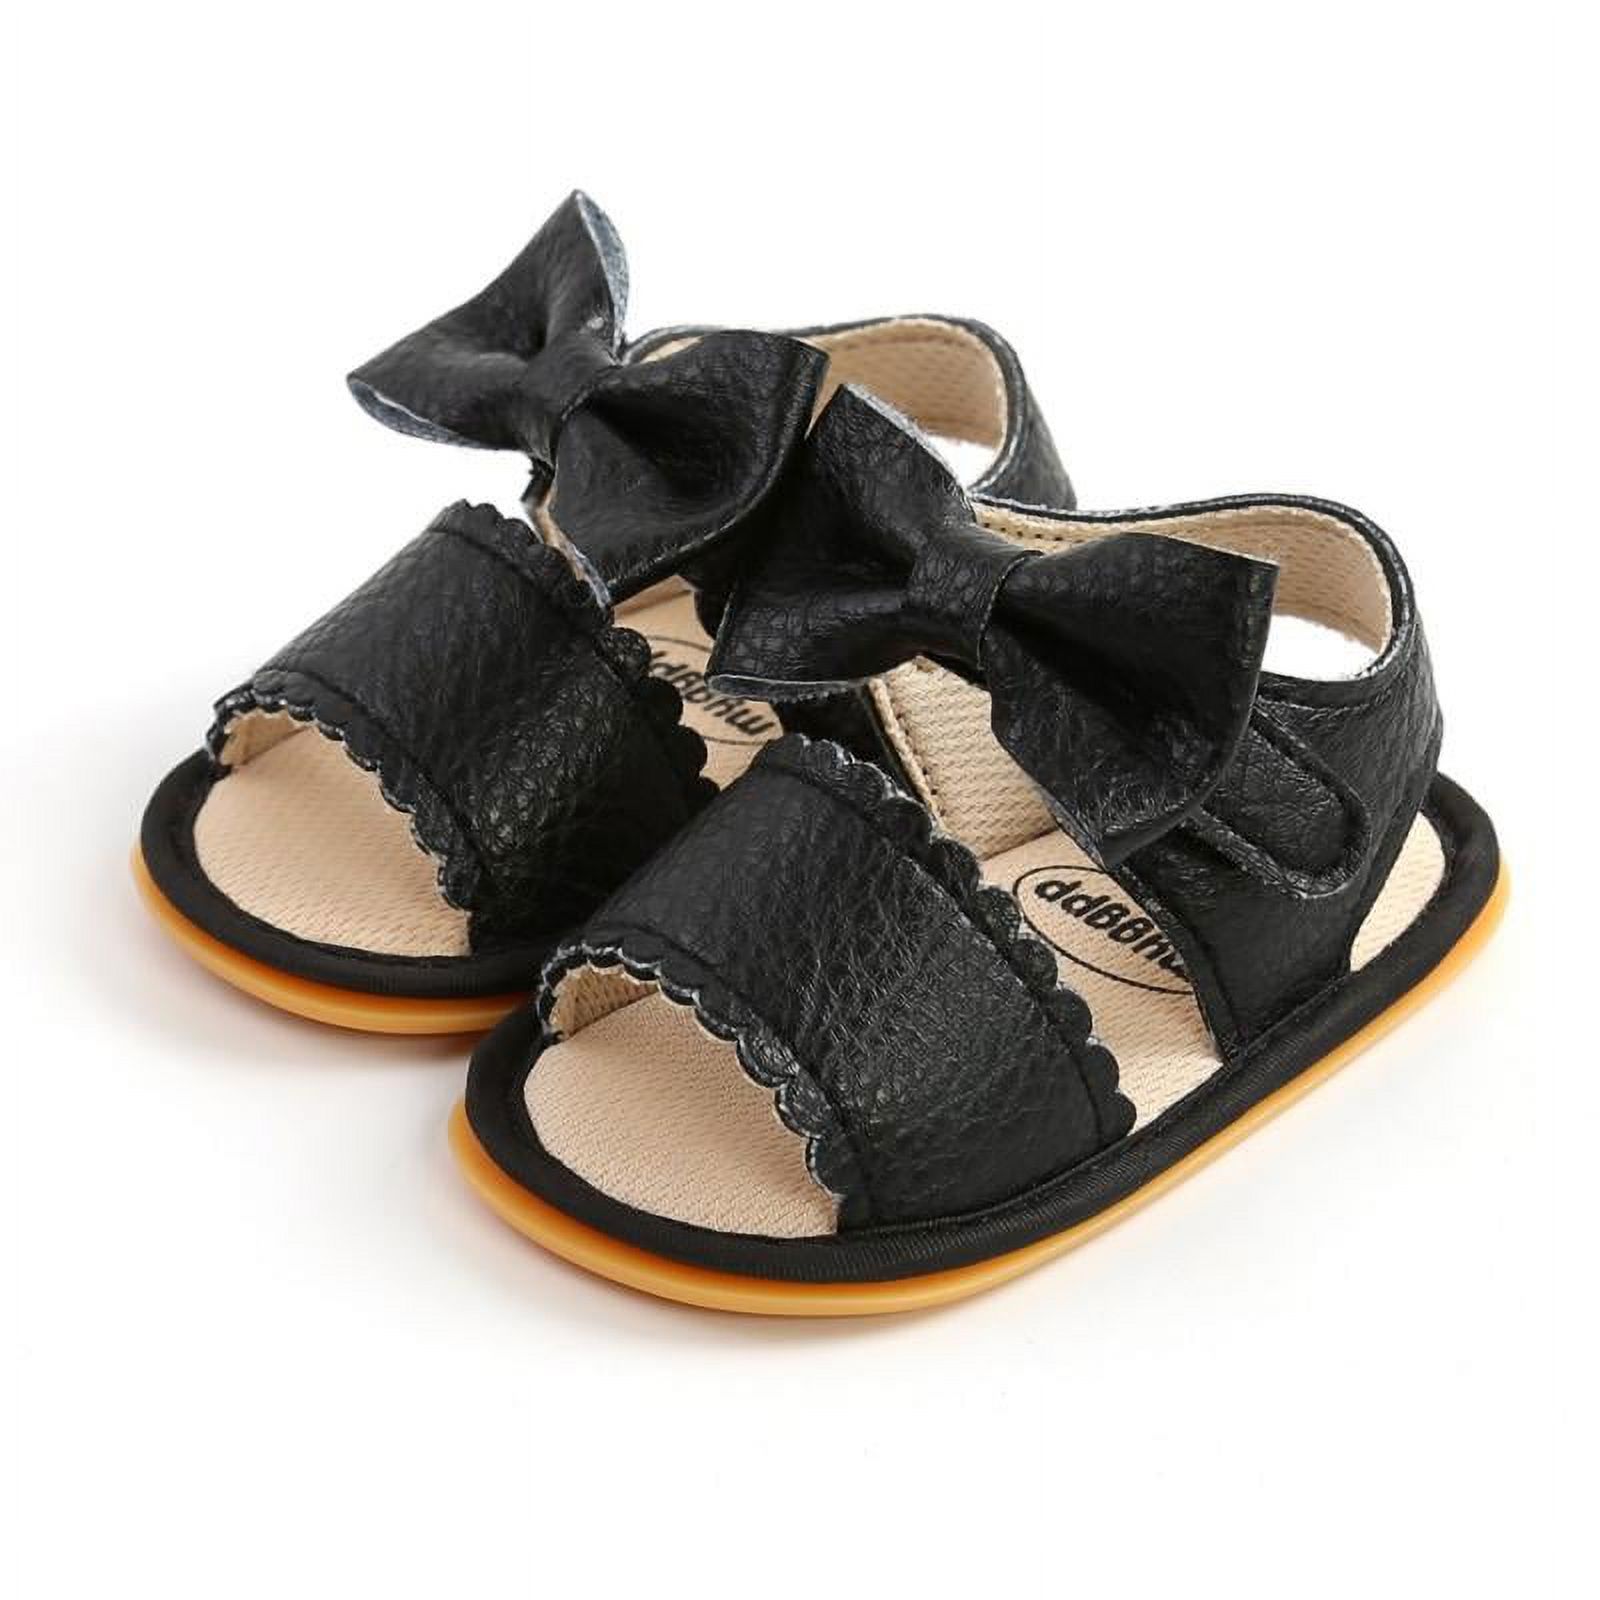 Infant Baby Girl Boy Casual Sandals Premium Princess Flats Summer Outdoor Beach Athletic Shoes Breathable Soft Anti Slip Rubber Sole Newborn Toddler Prewalker First Walking Shoes - image 2 of 6